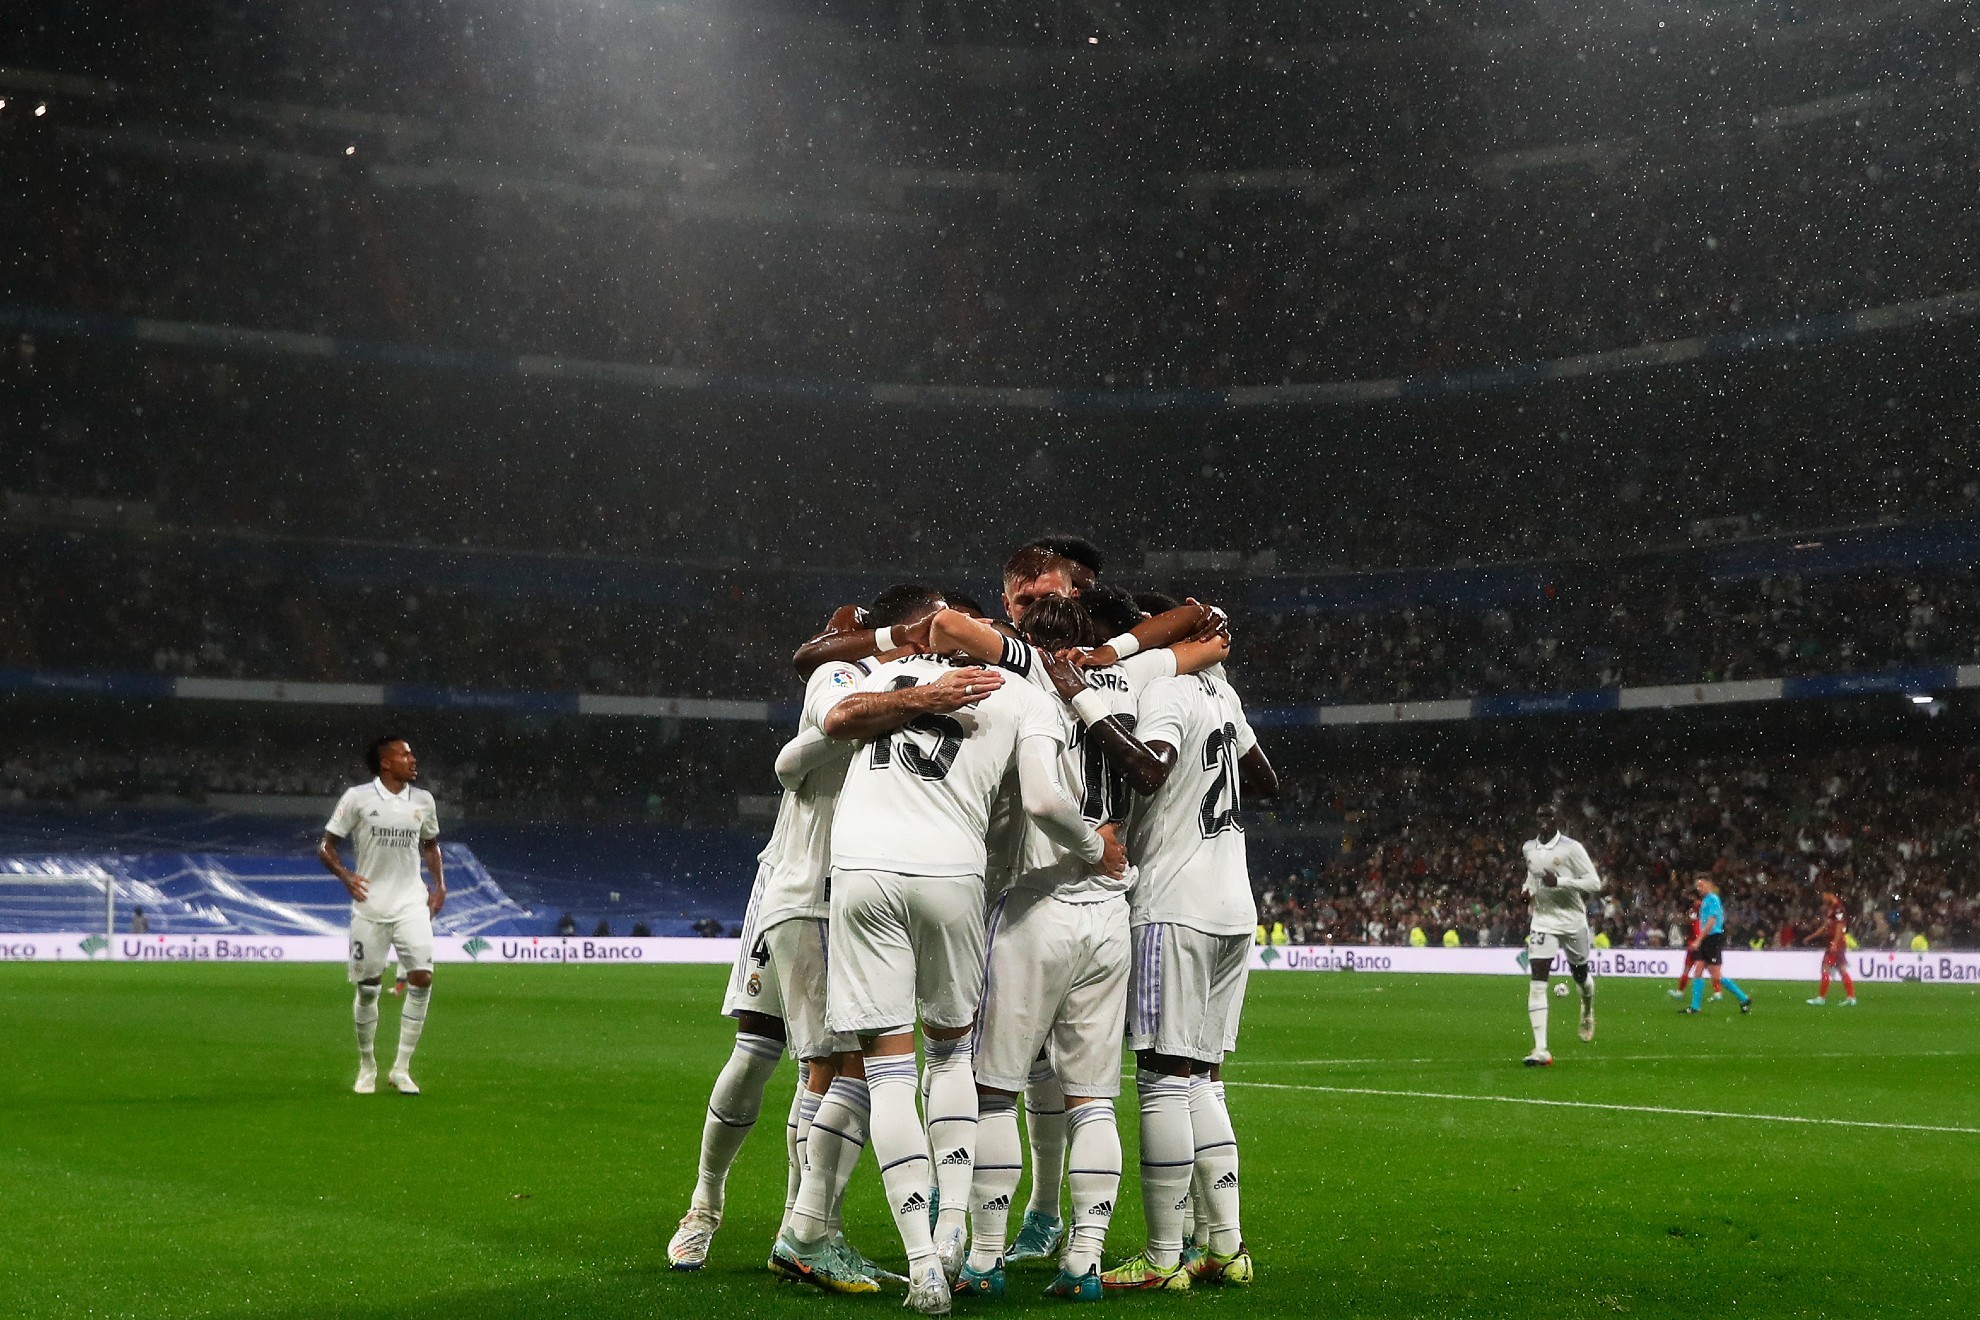 Real Madrid celebrate a goal at home